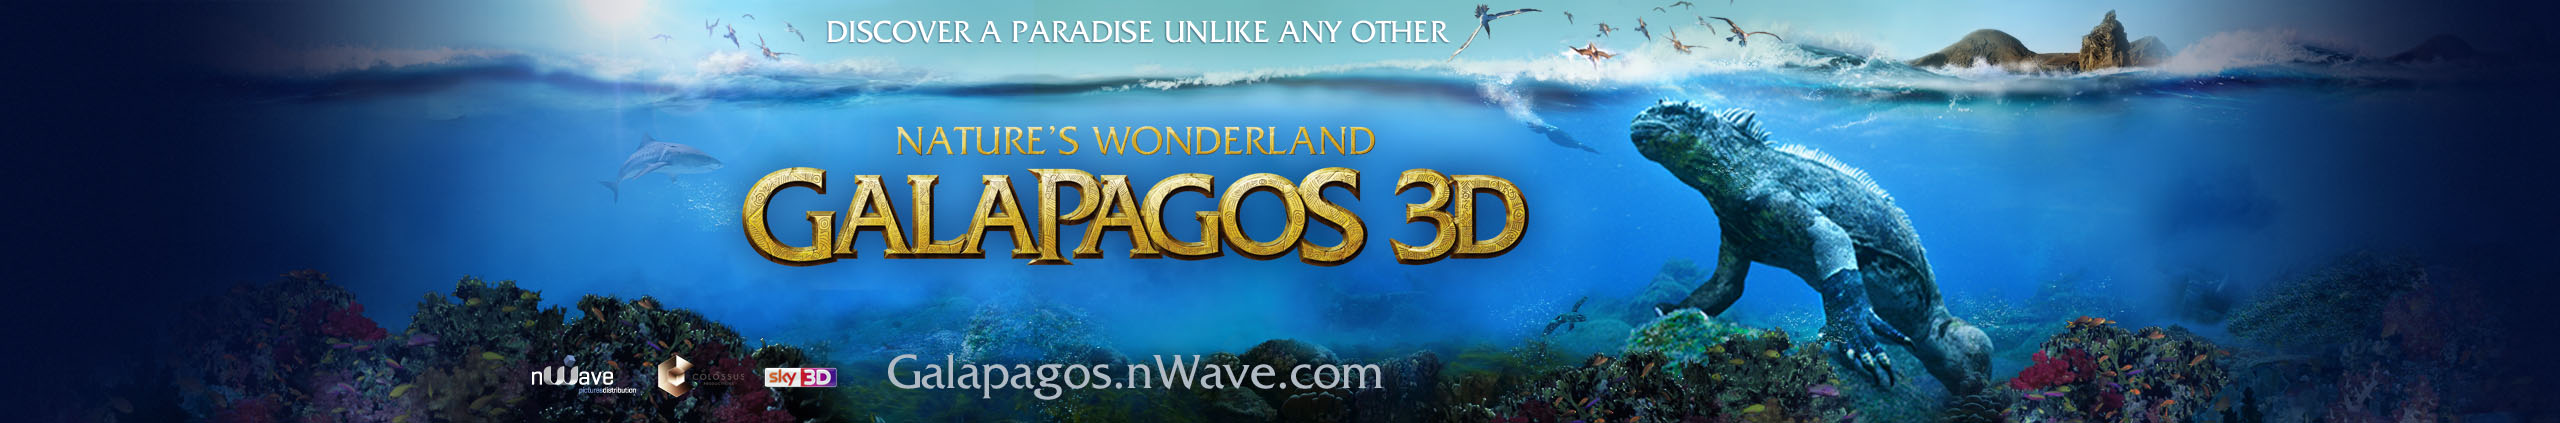 Galapagos 3D YouTube Cover